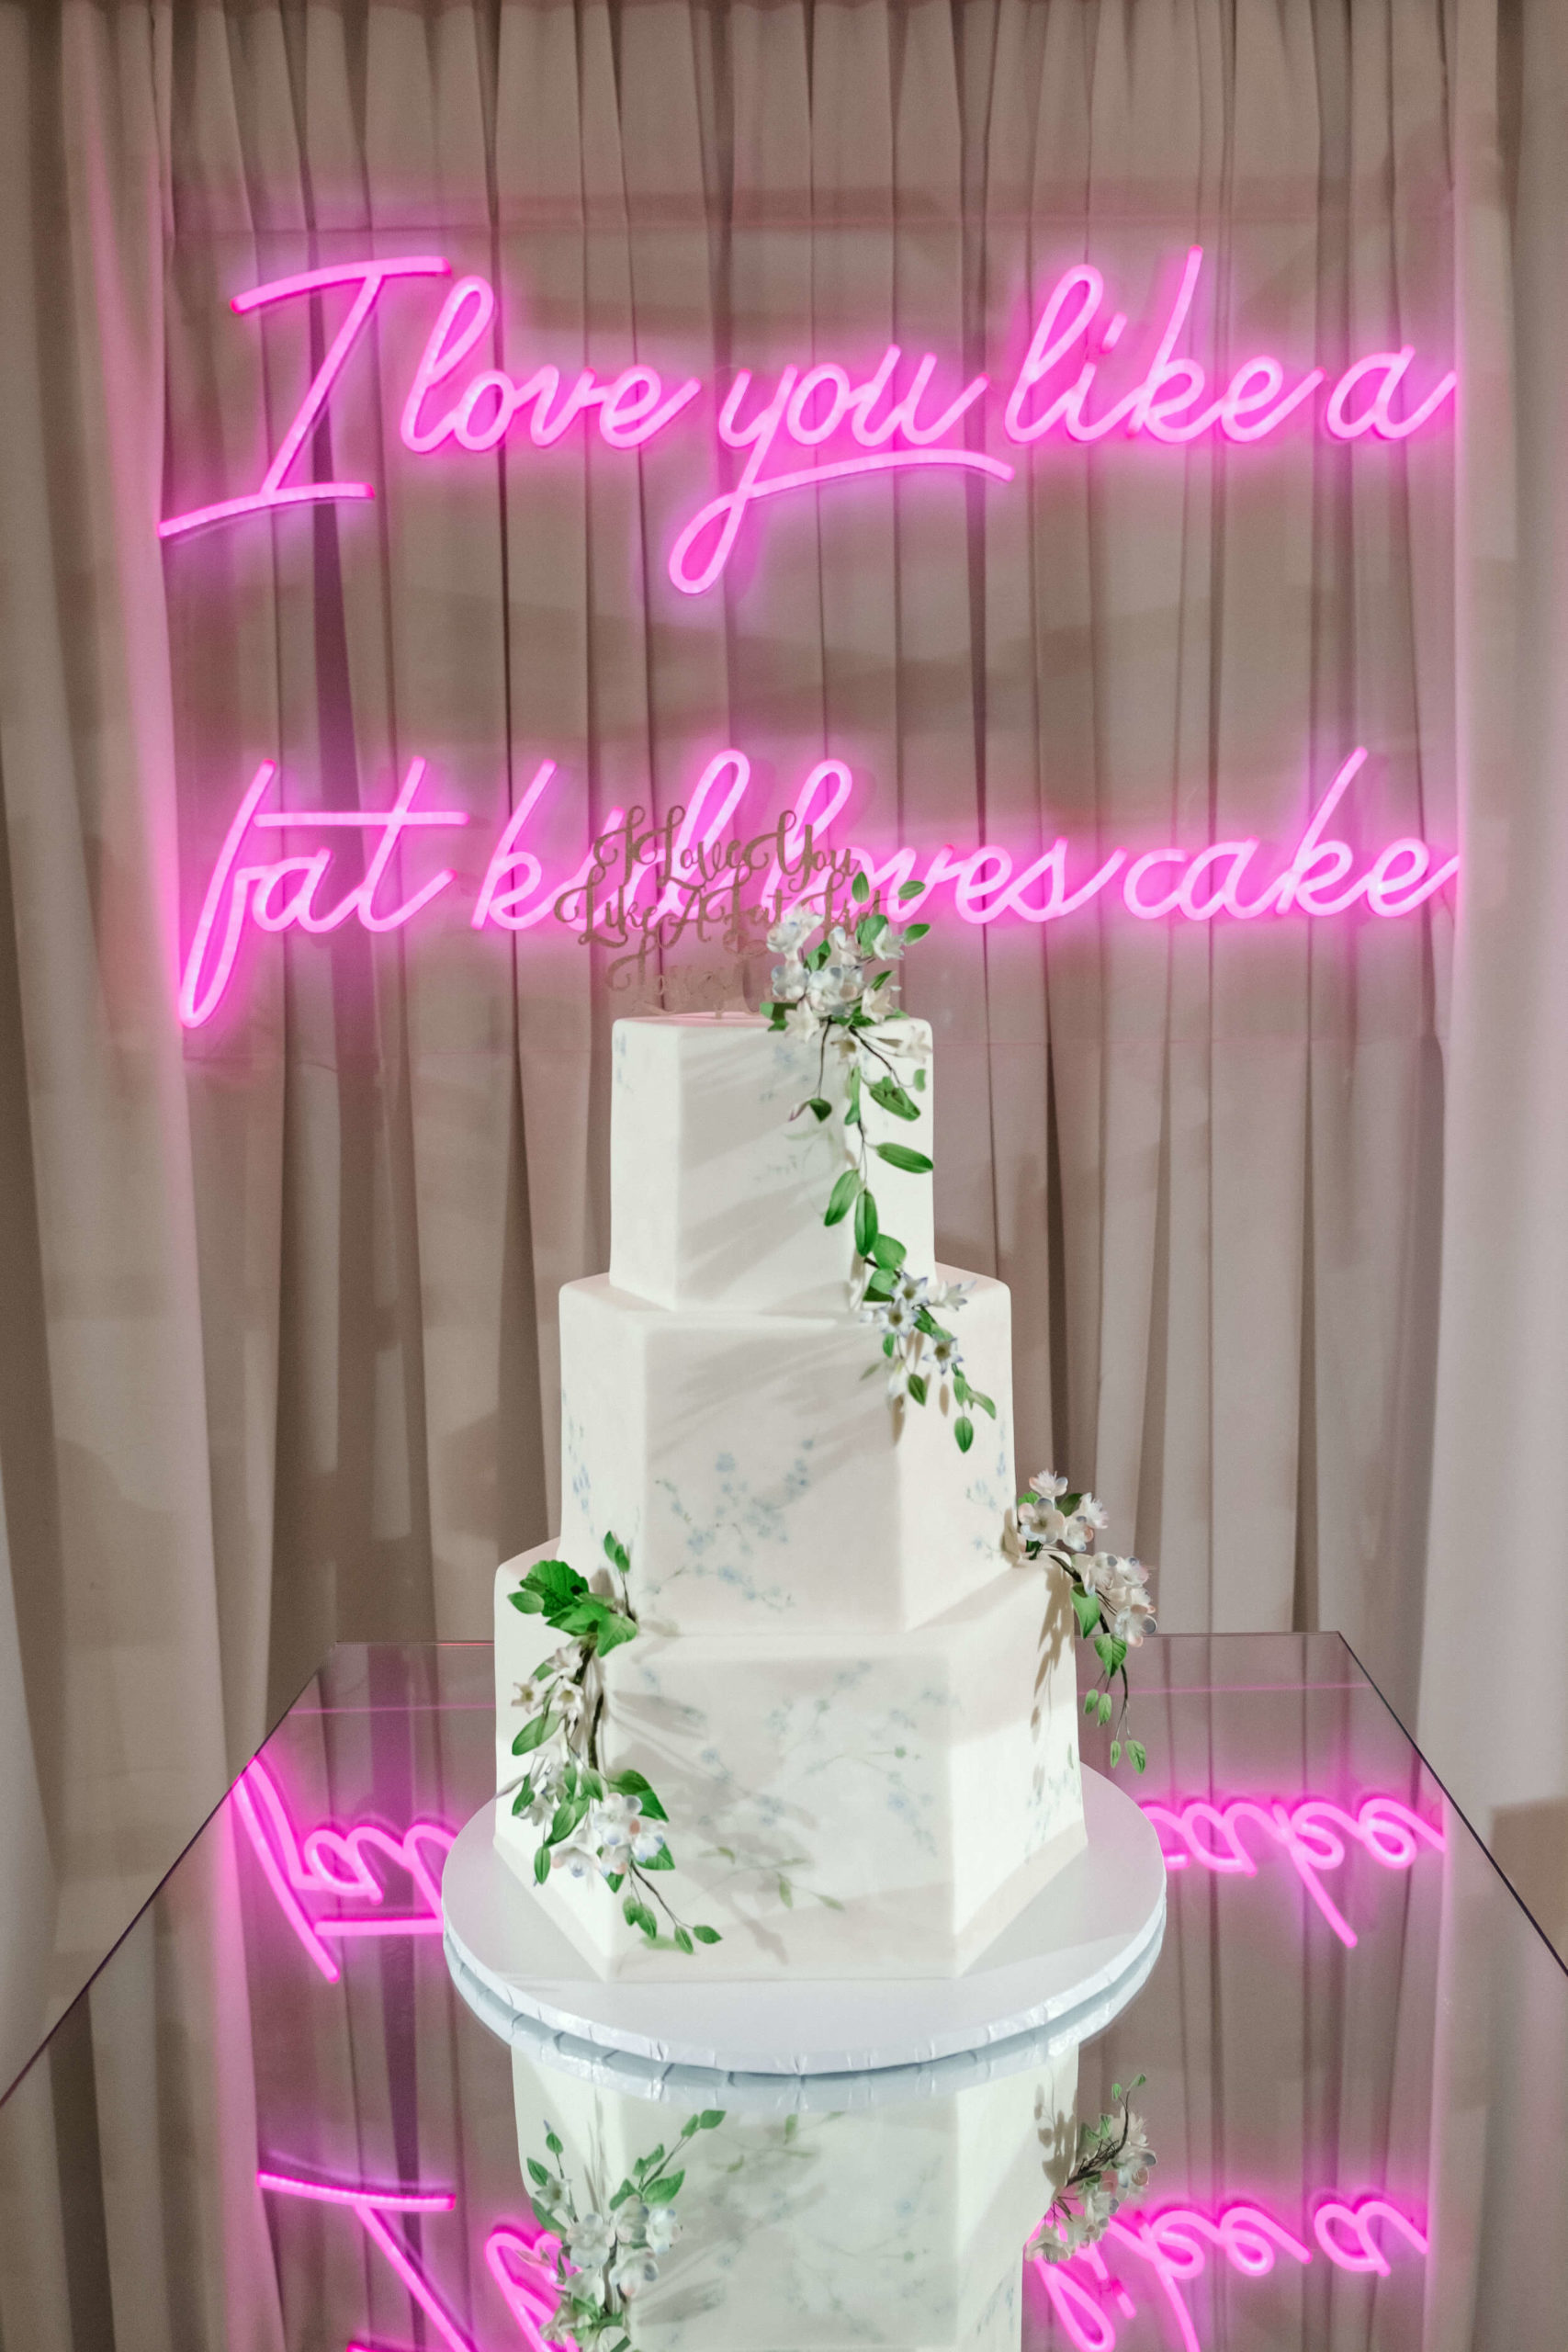 wedding cake and neon sign designed by top wedding planner Layne Povey